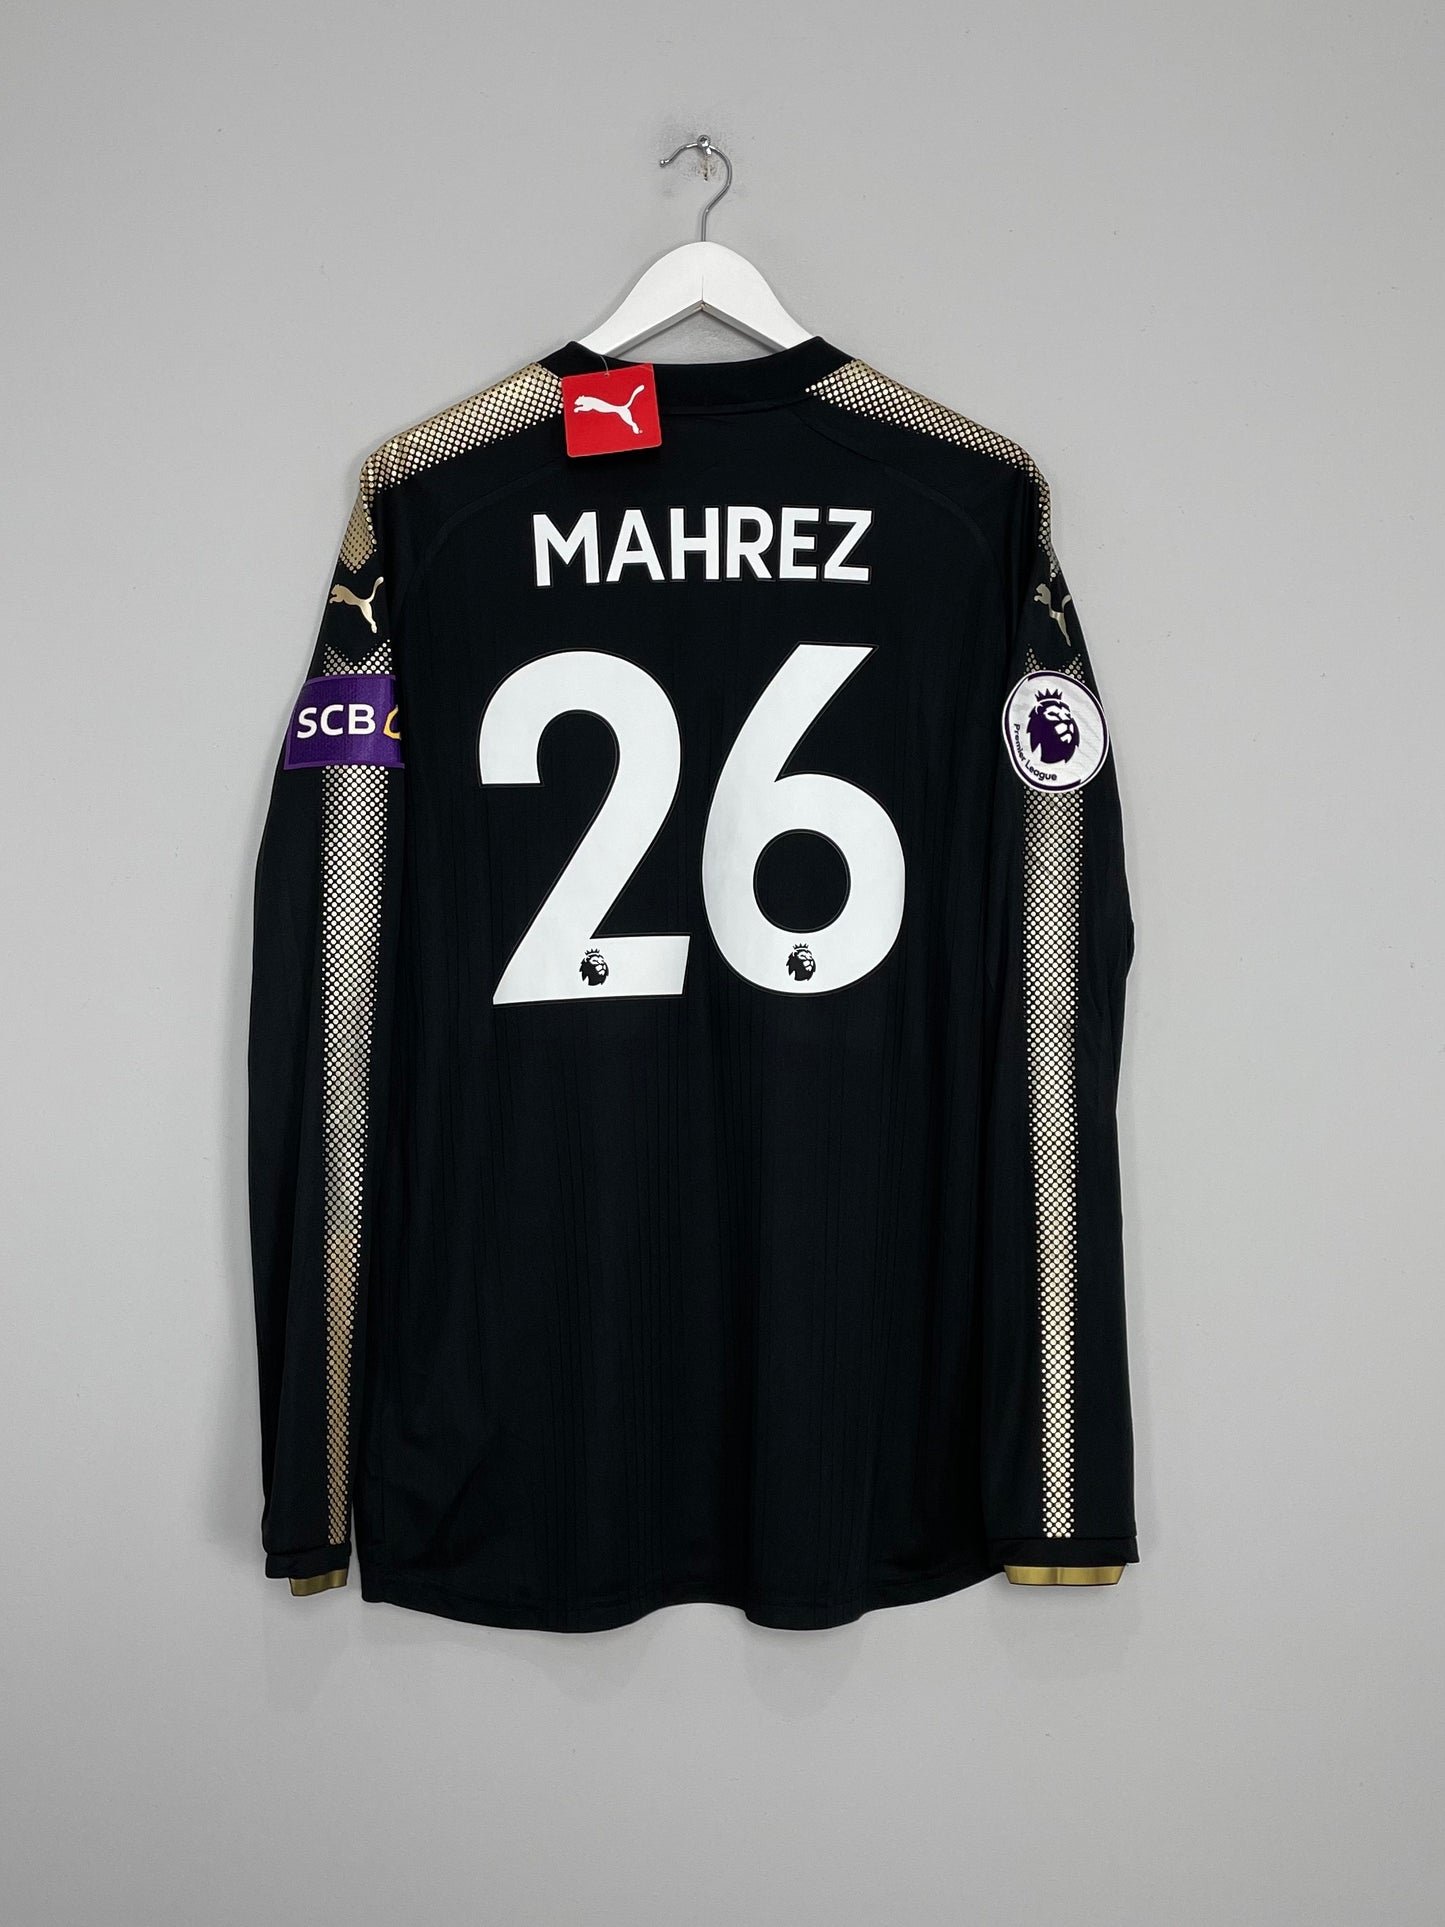 Image of the Leicester Mahrez shirt from the 2017/18 season